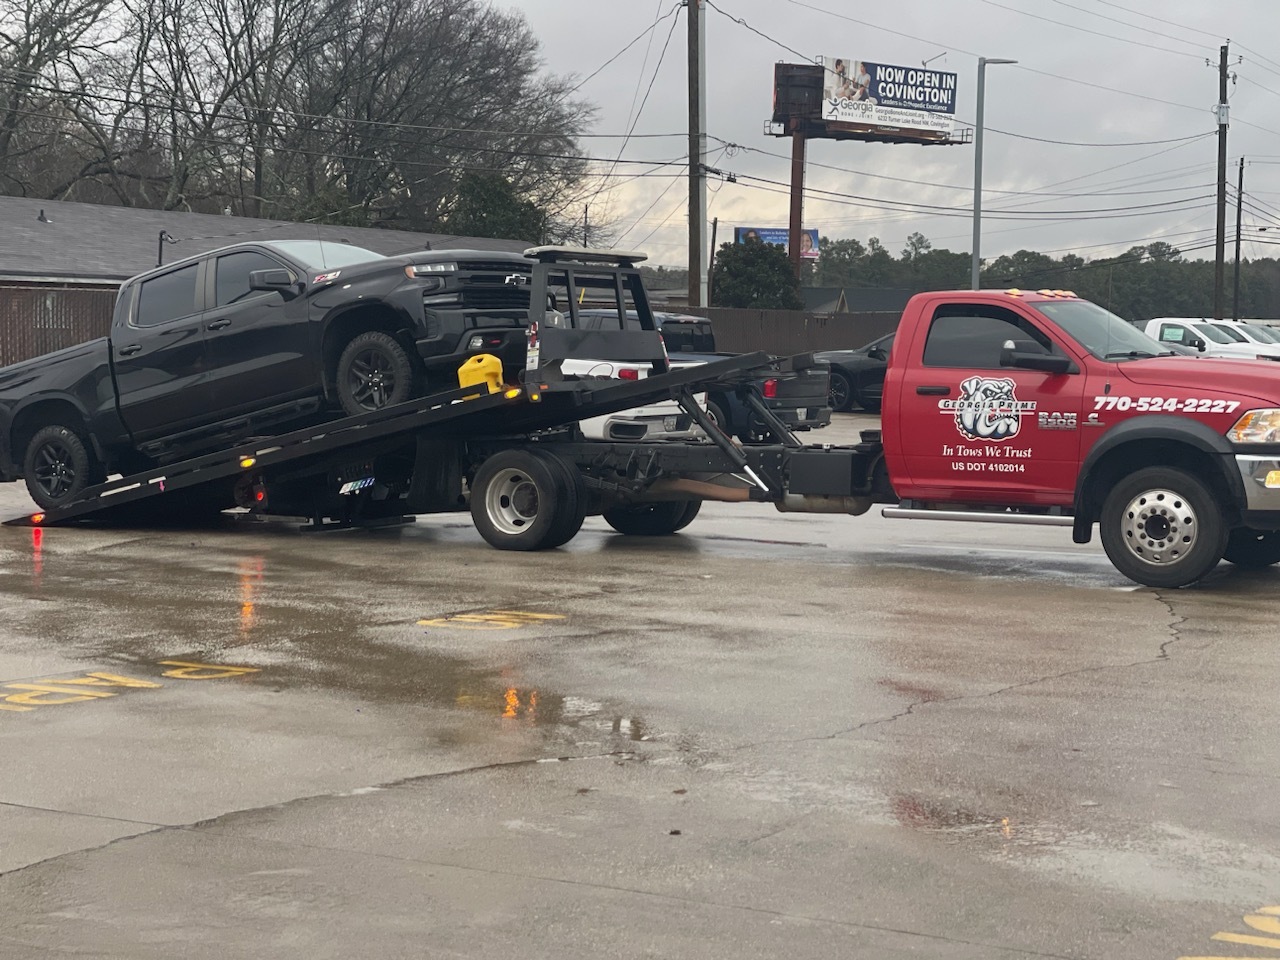 Our flatbed tow truck doing the action in Conyers, GA.